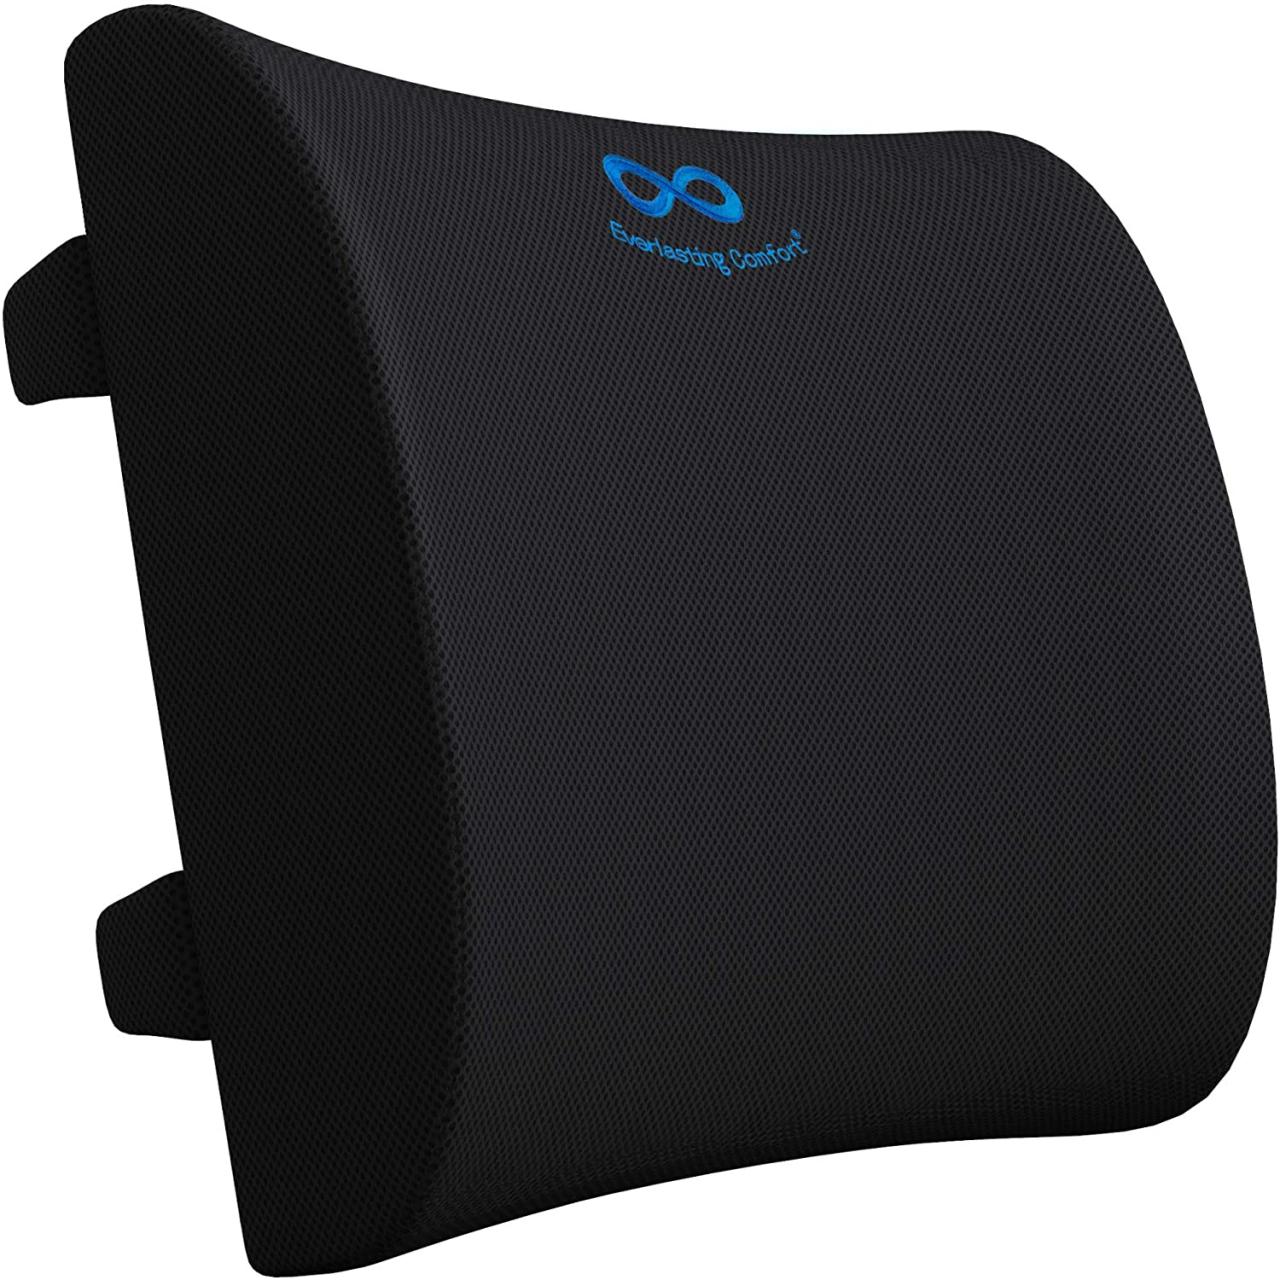 Everlasting Comfort Lumbar Support Pillow for Office Desk Chair and Car  Seat - Pure Memory Foam Lower Back Cushion (Black) : Everlasting Comfort:  Amazon.co.uk: Home & Kitchen